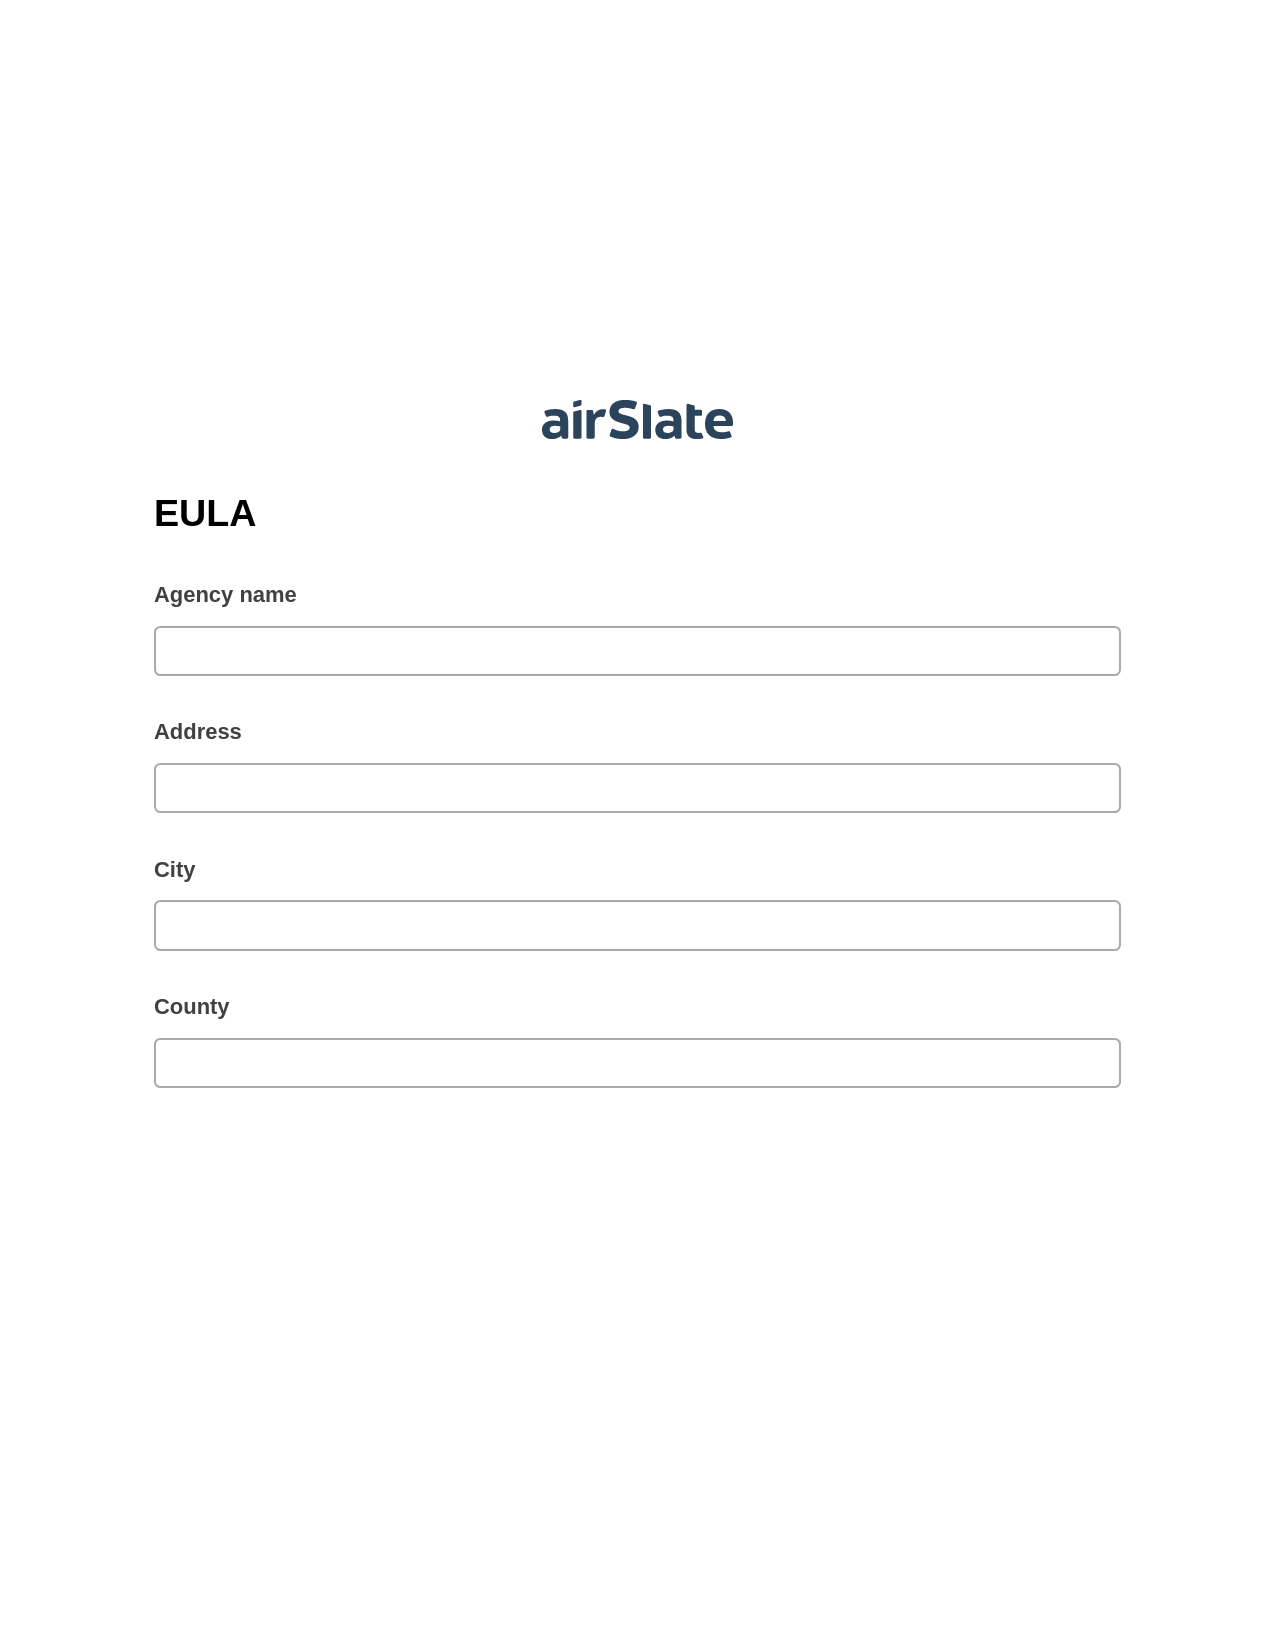 EULA Pre-fill from Google Sheet Dropdown Options Bot, Remove Tags From Slate Bot, Dropbox Bot